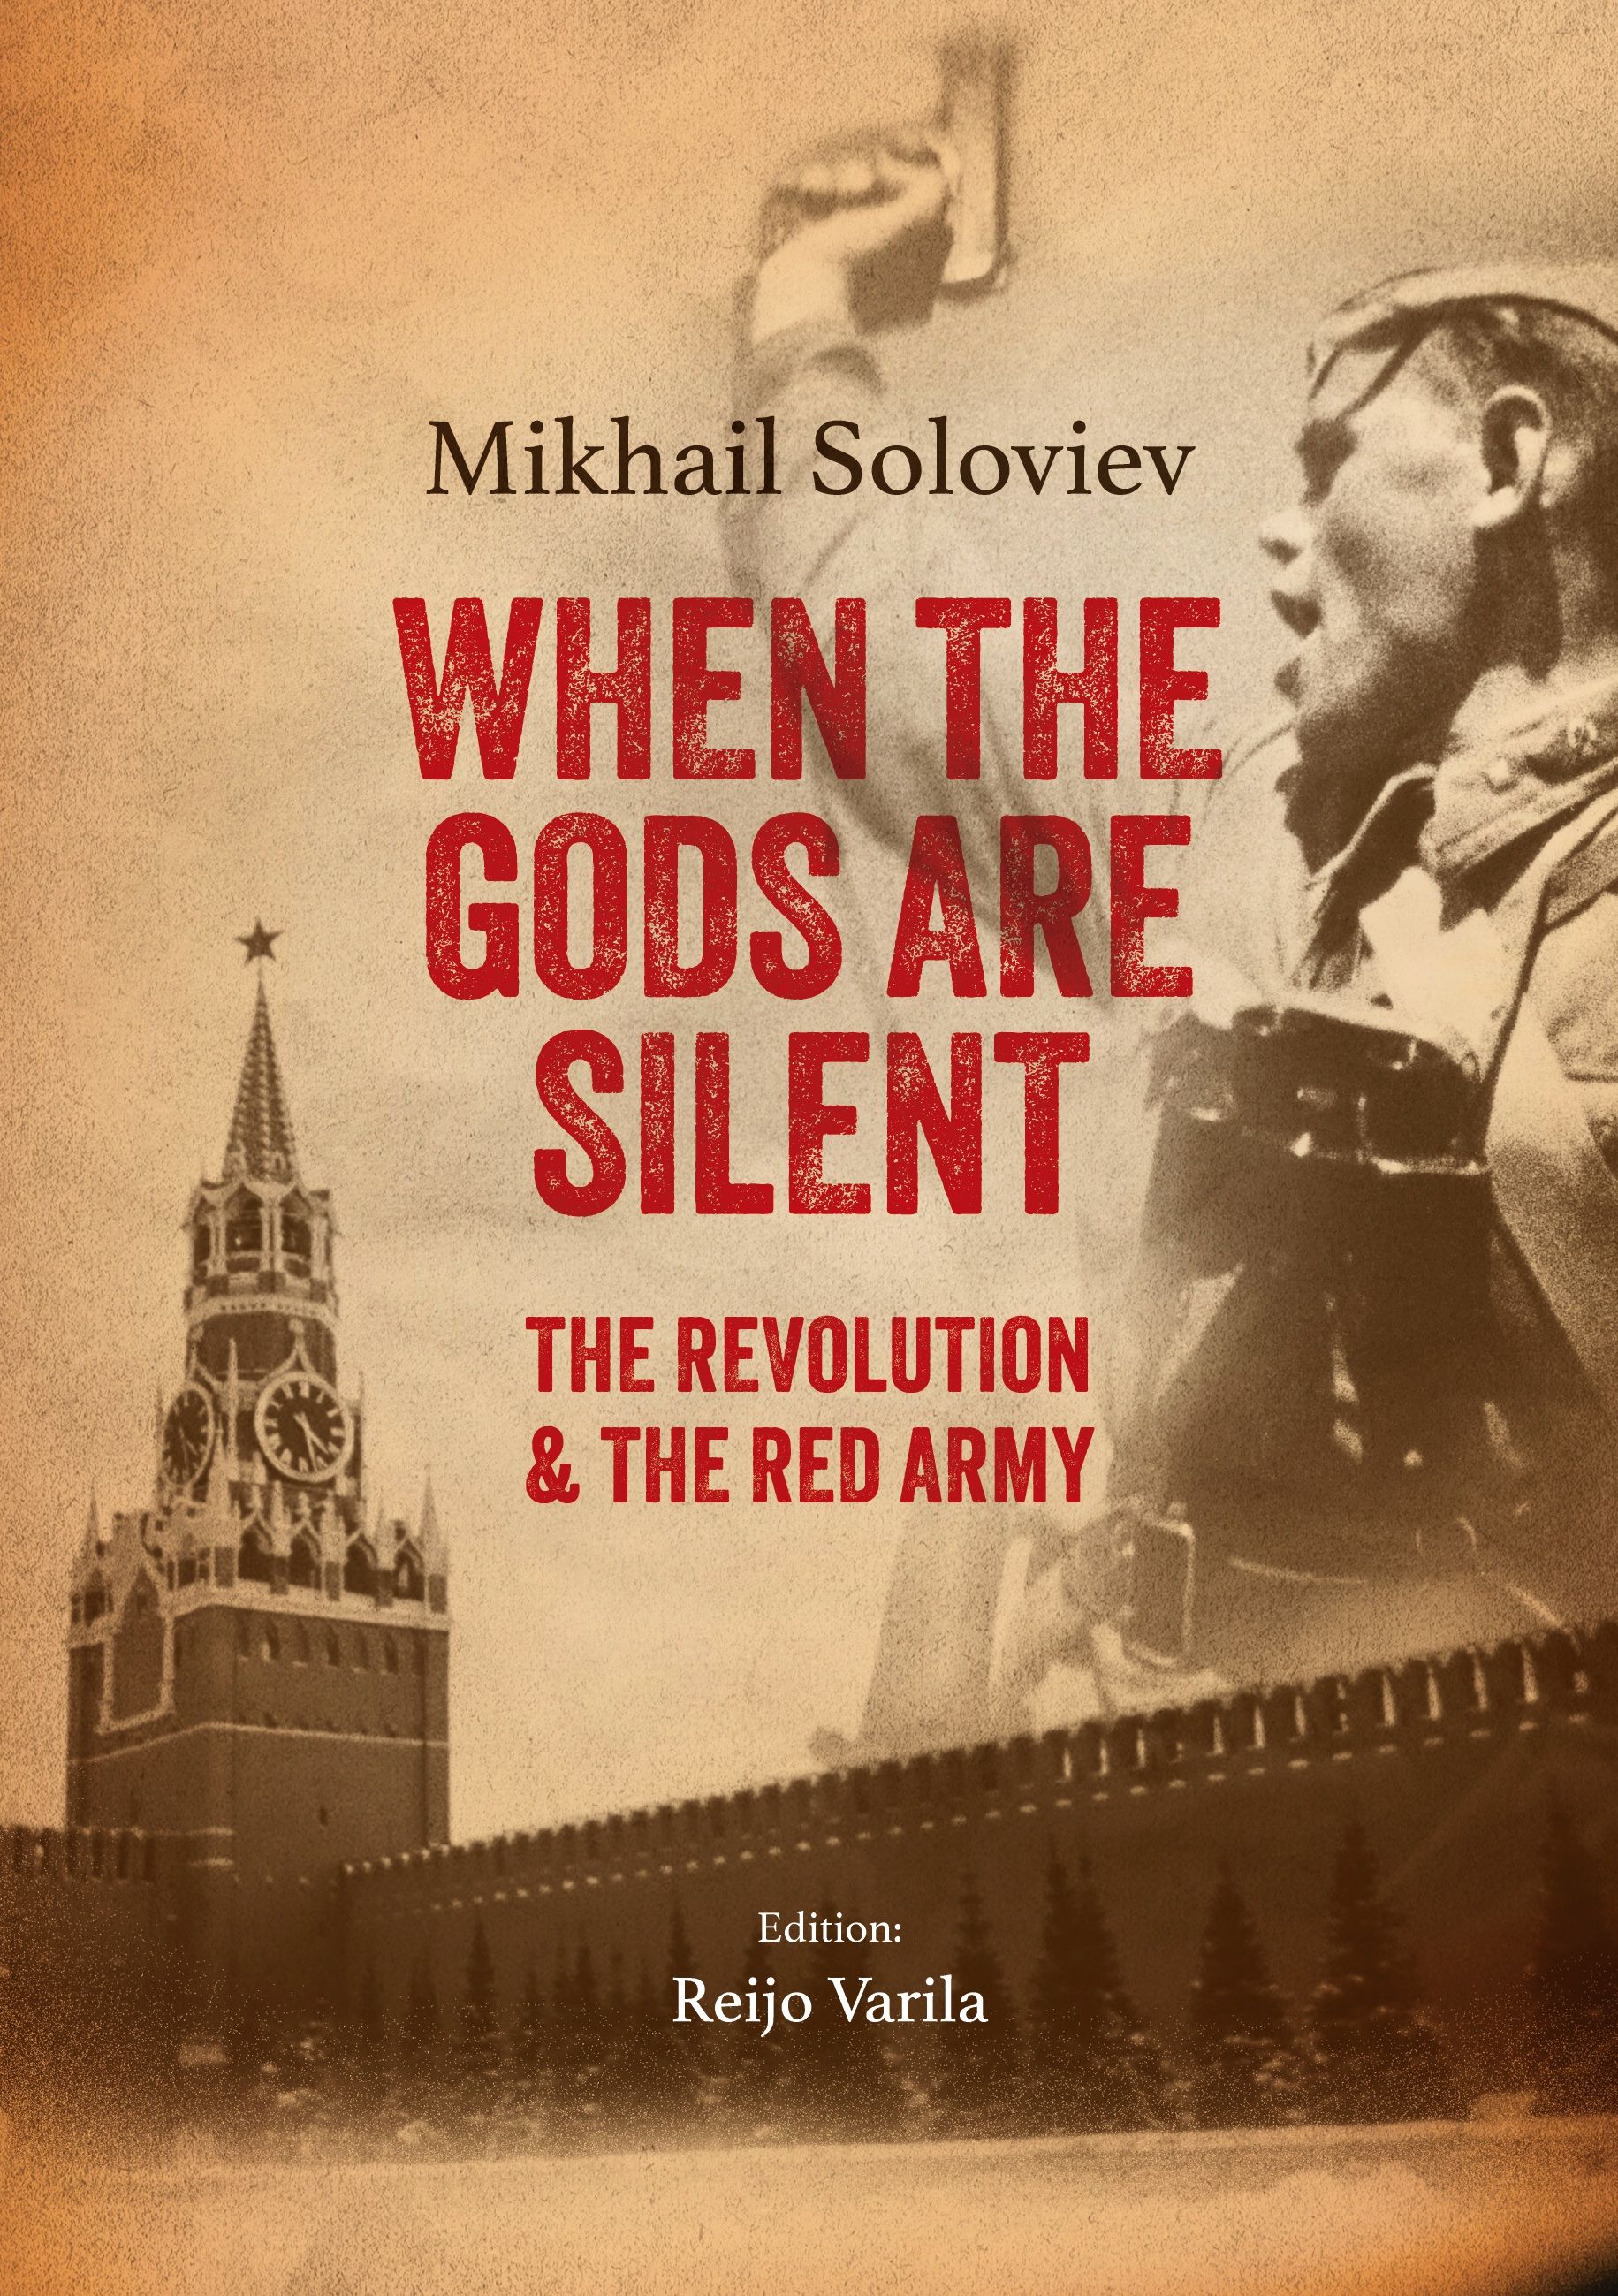 Mikhail Soloviev : When the Gods are silent